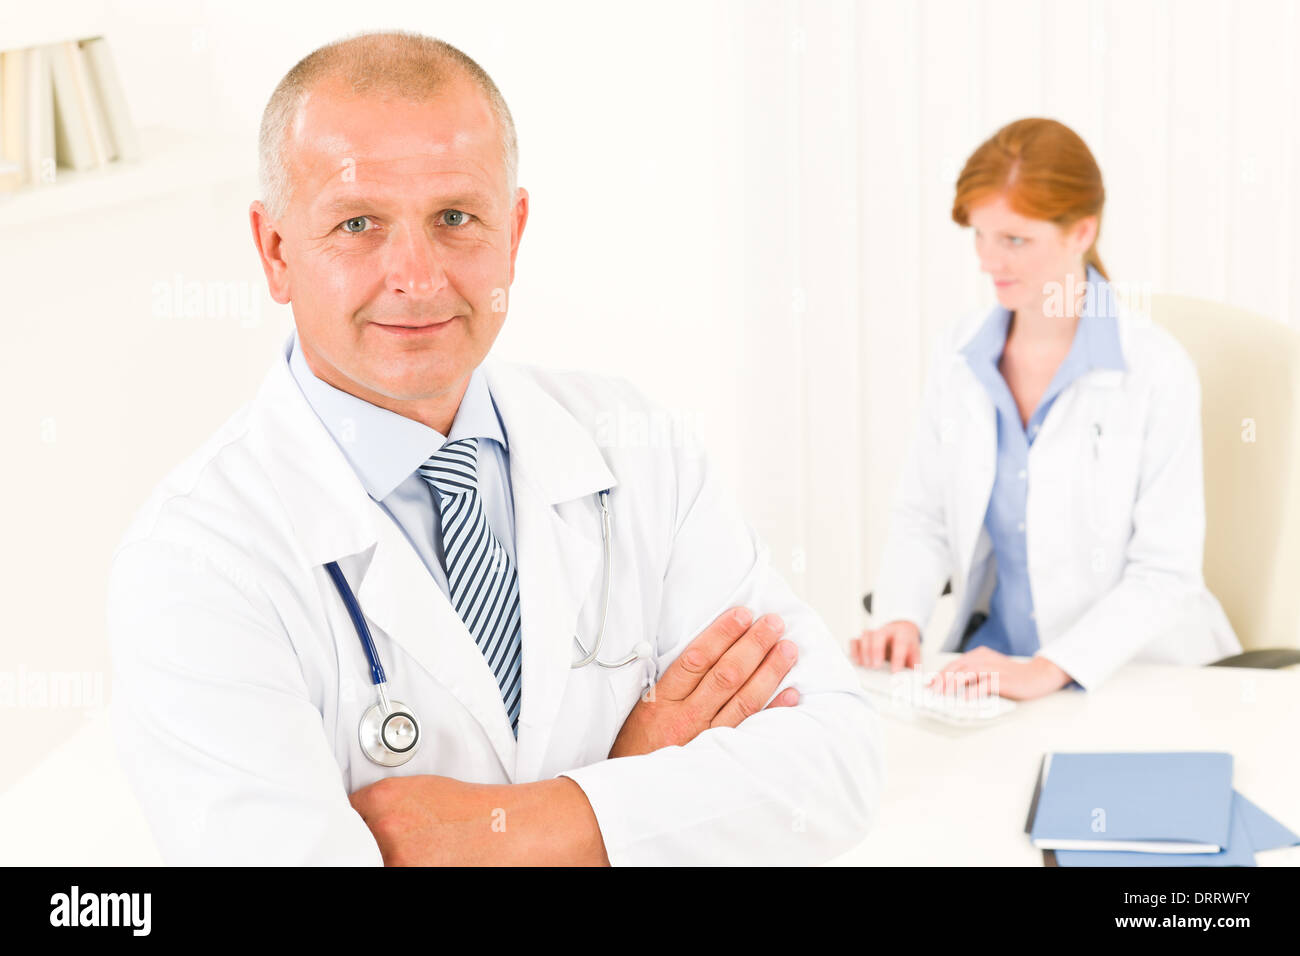 Medical doctor team senior male young woman Stock Photo